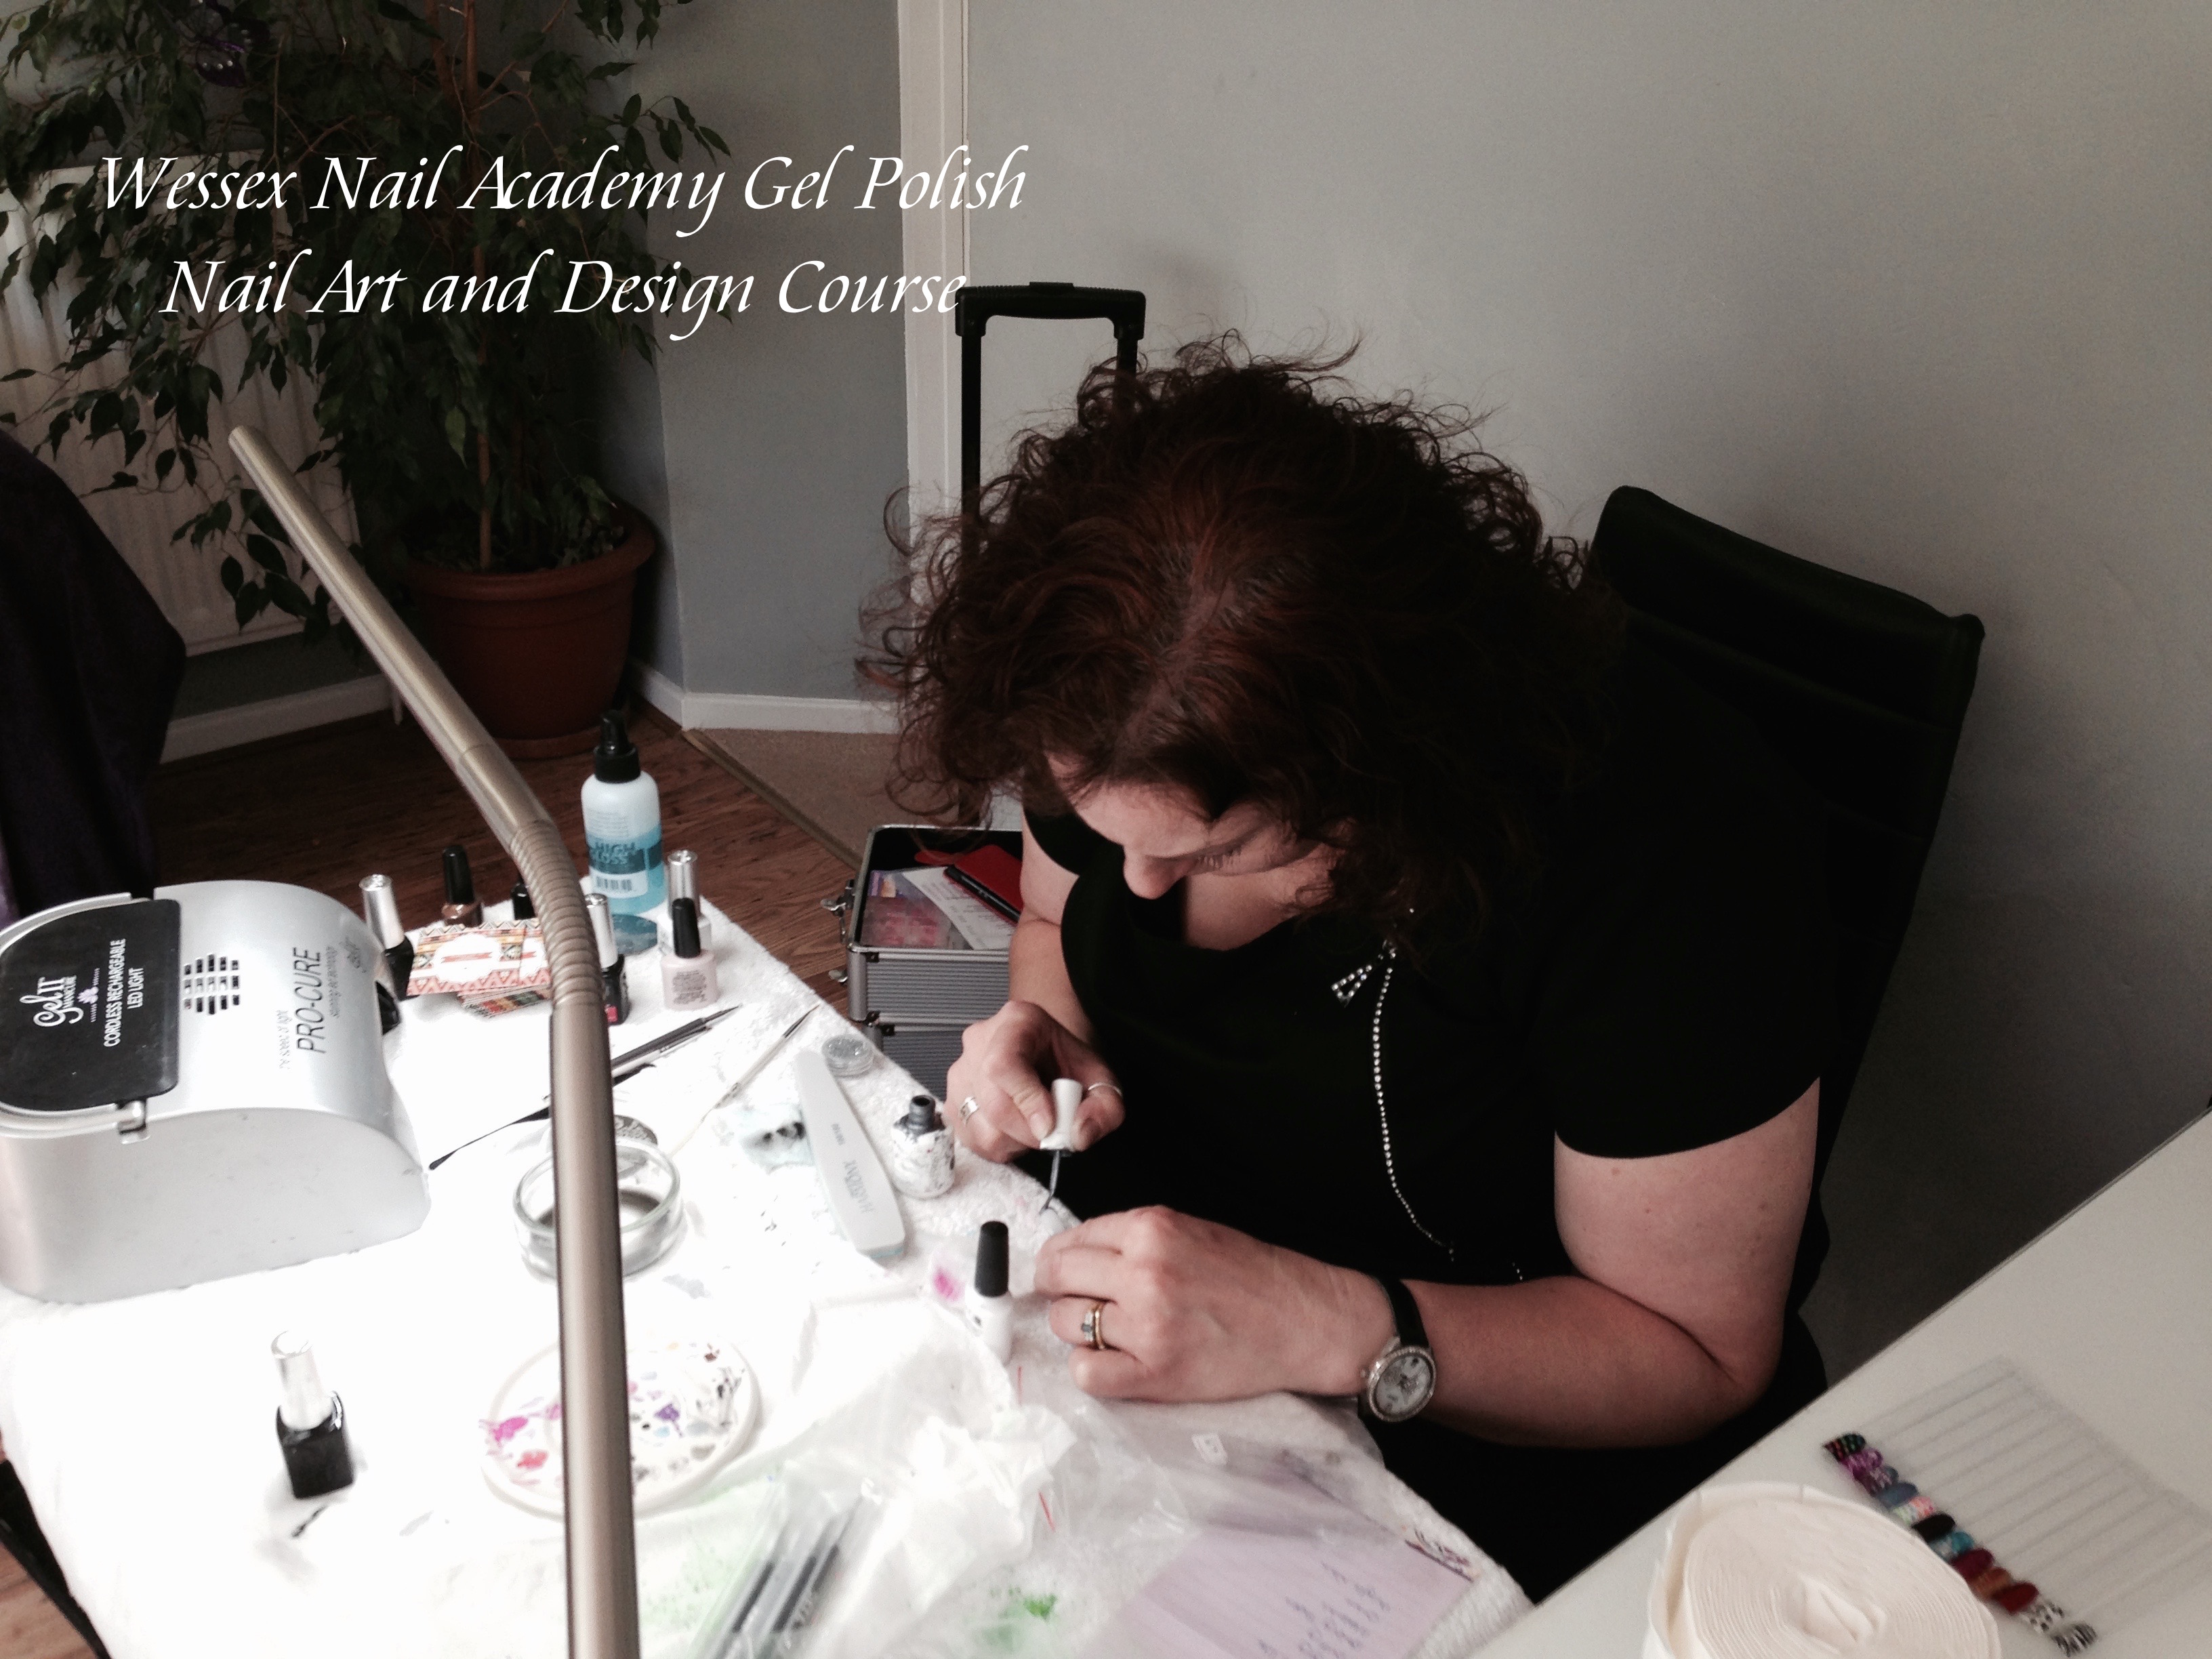 Nail extension training, nail training course, Wessex Nail Academy Okeford Fitzpaine, Dorset